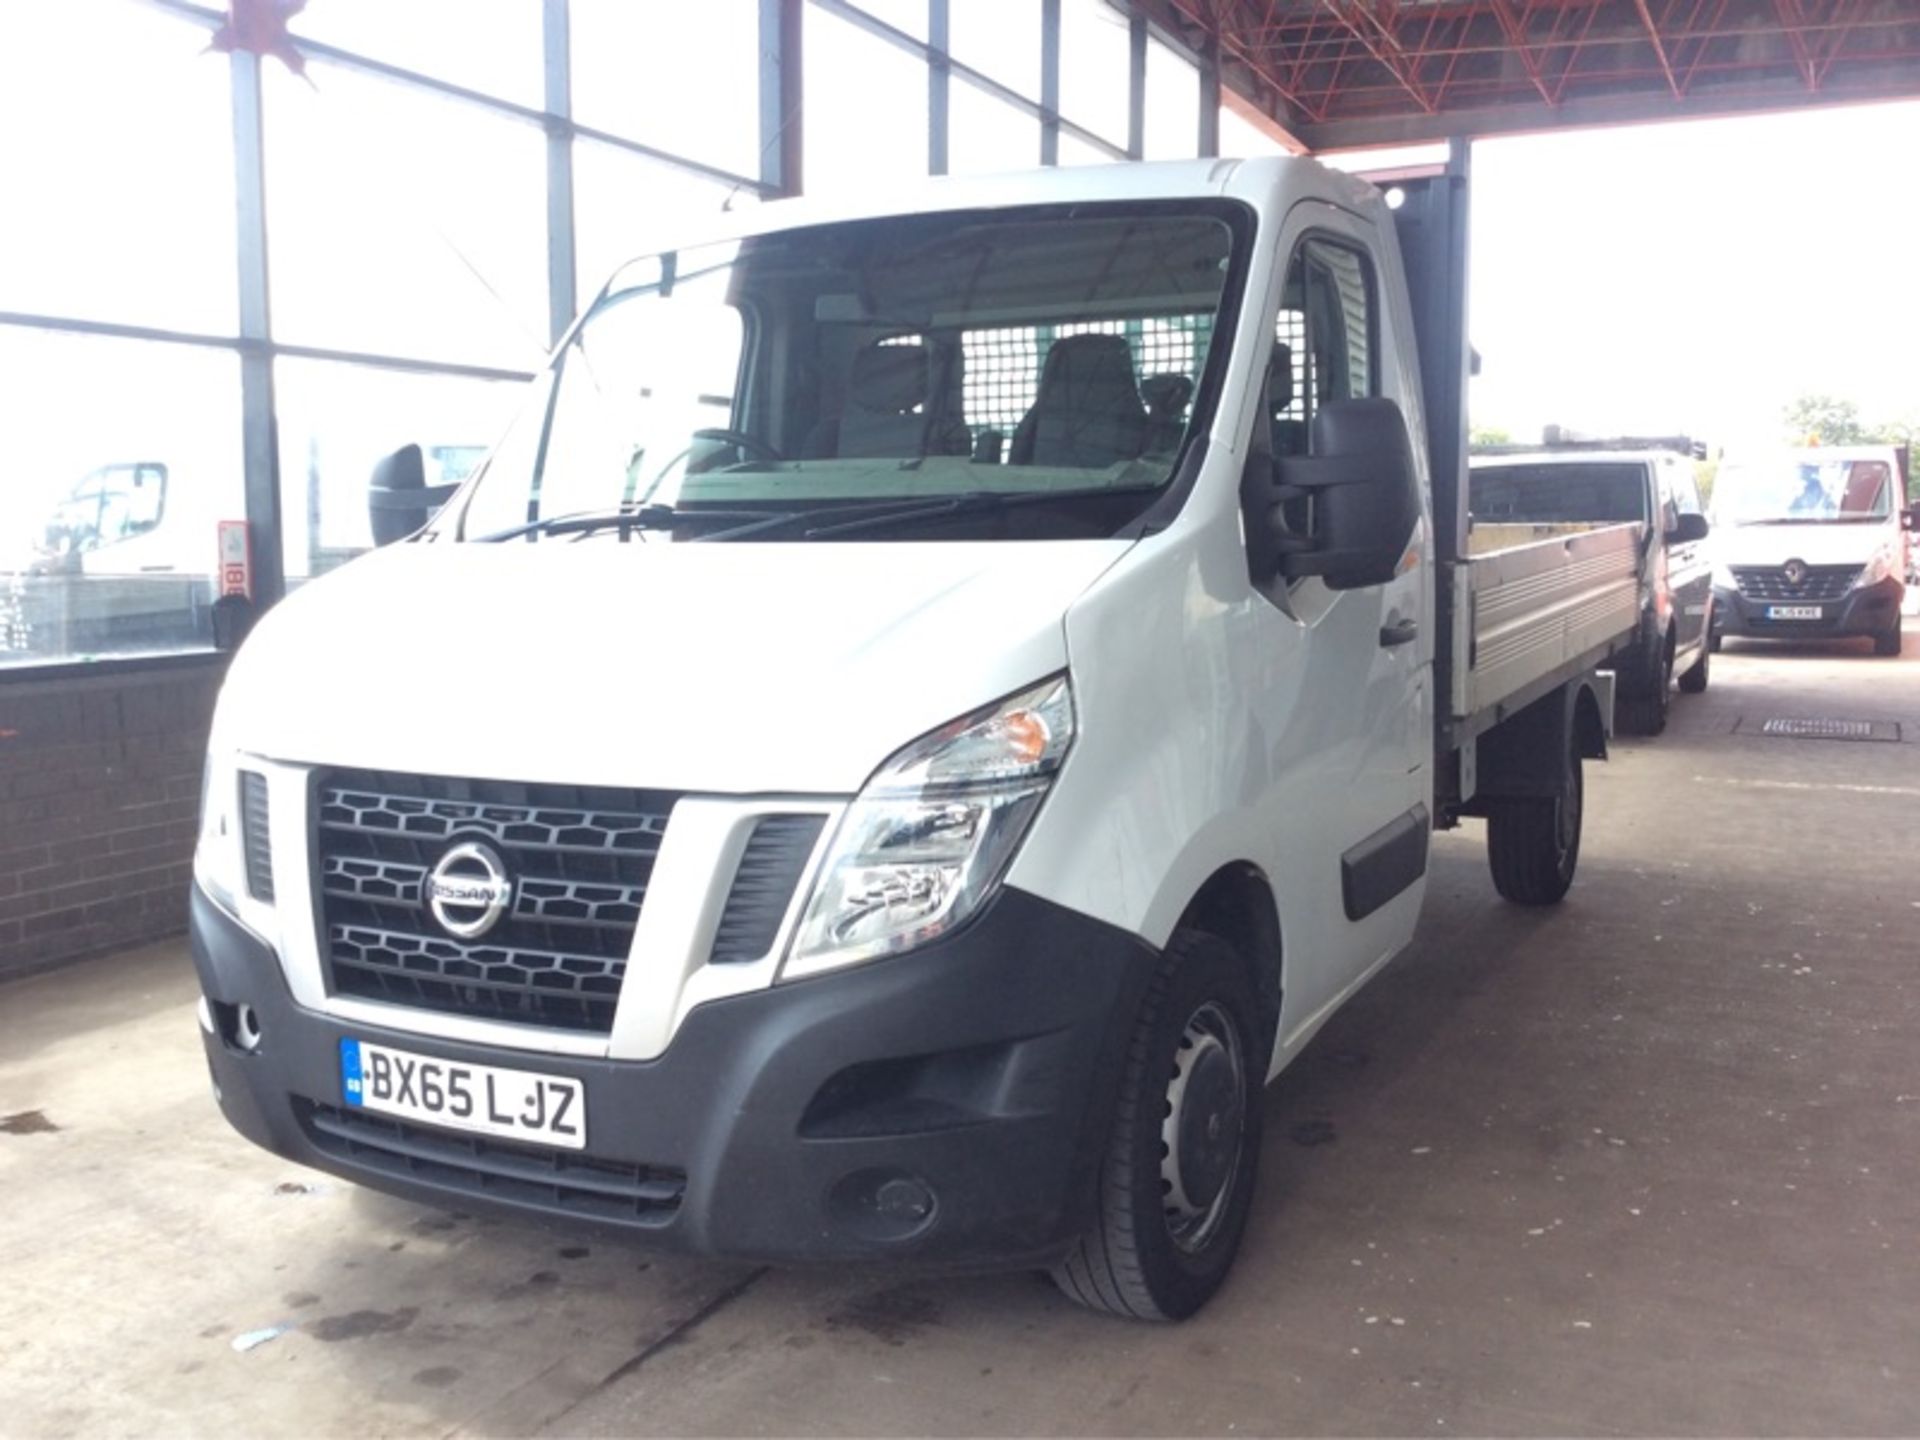 2015/65 REG NISSAN NV400 DCI E SHR 2.3 DIESEL WHITE DROPSIDE LORRY, SHOWING 0 FORMER KEEPERS - Image 3 of 8